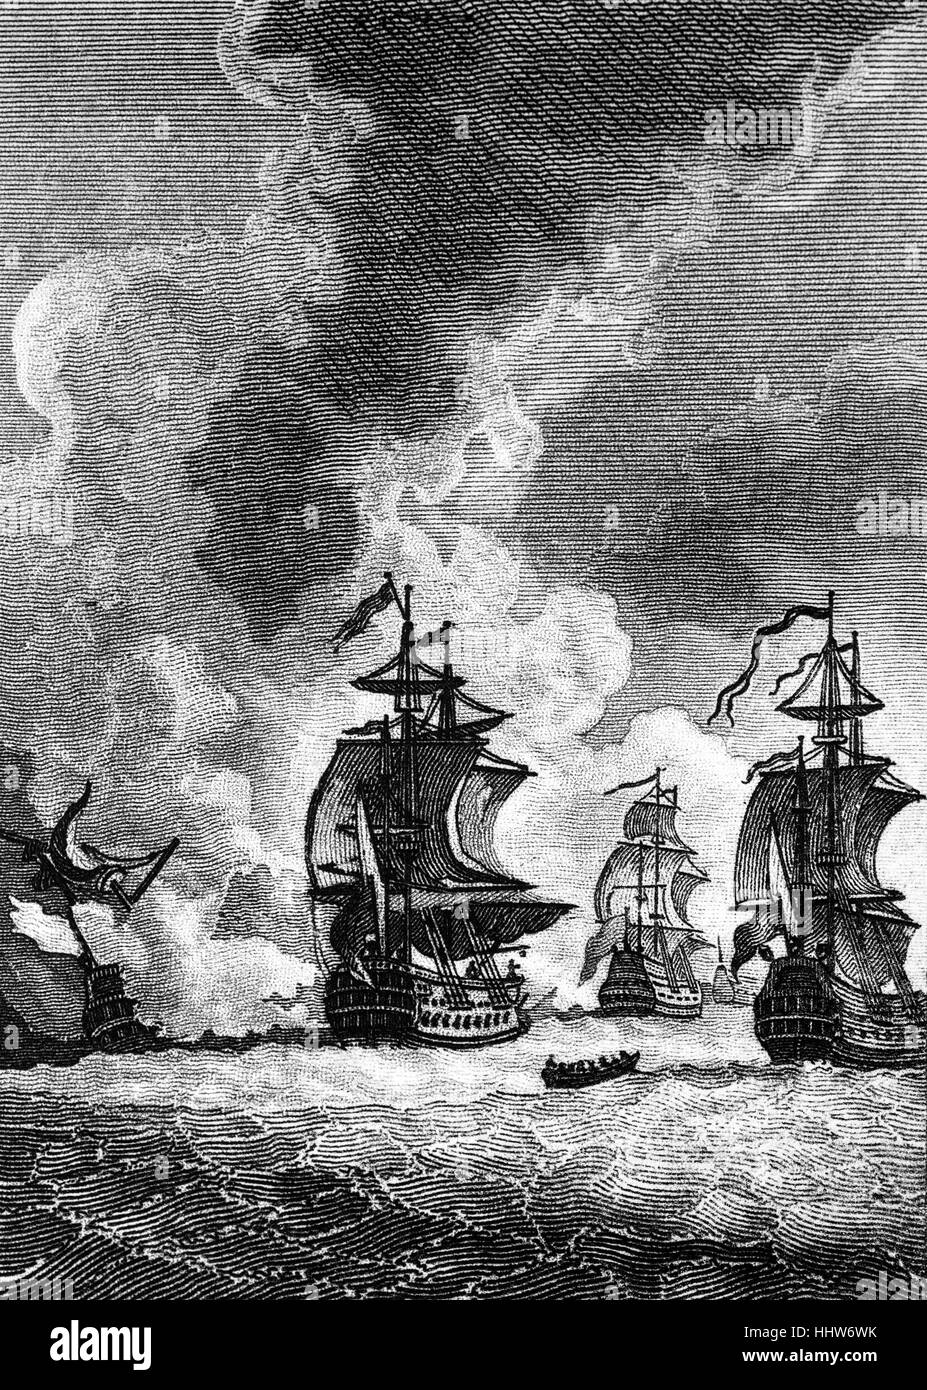 The Battle of Porto Bello, or the Battle of Portobello, was a 1739 battle between a British naval force led by Vice Admiral Edward Vernon captured the settlement of Portobello in Panama, and its Spanish defenders. It took place during the War of the Austrian Succession, in the early stages of the war sometimes known as the War of Jenkins' Ear. It resulted in a popularly acclaimed British victory. Stock Photo